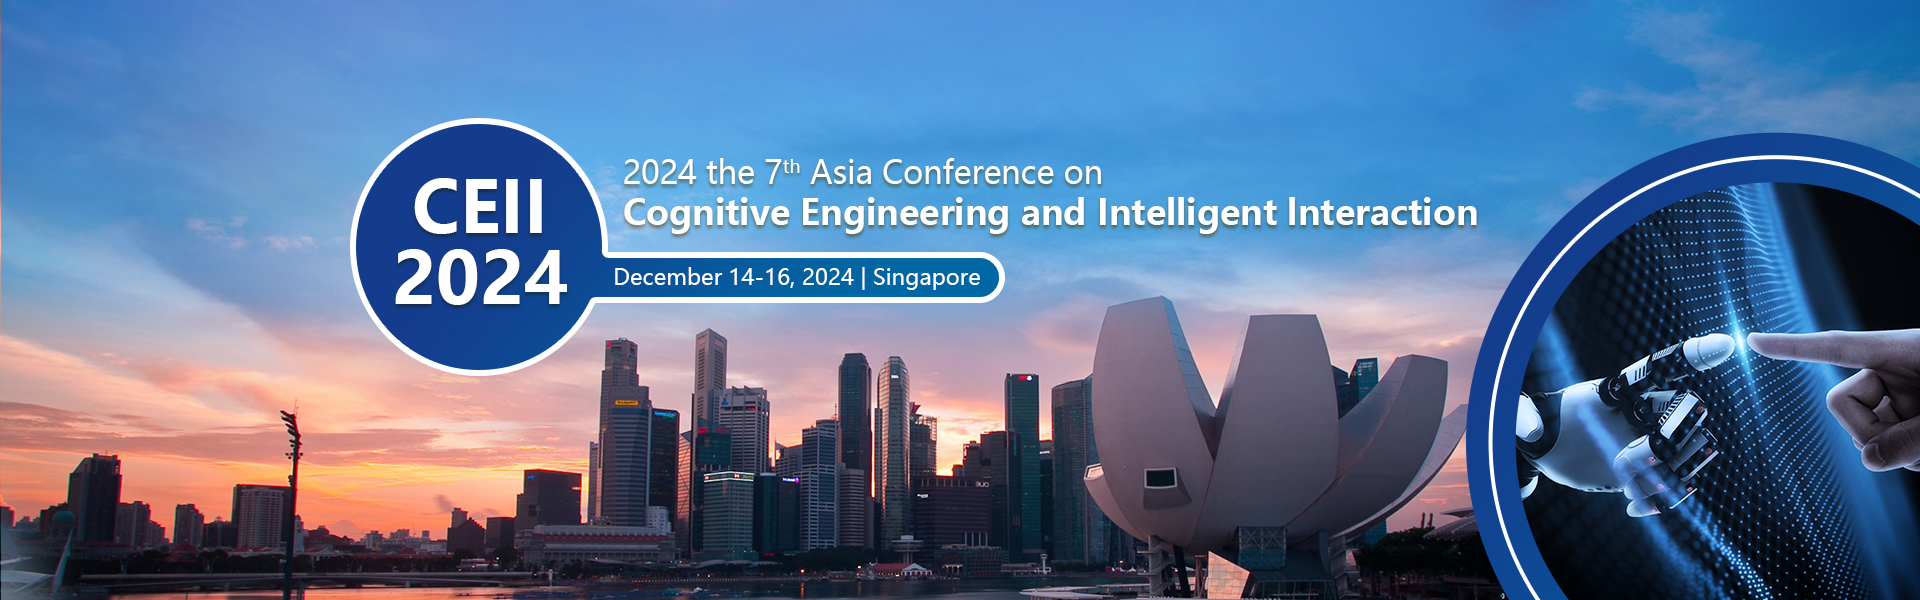 2024 The 7th Asia Conference on Cognitive Engineering and Intelligent Interaction